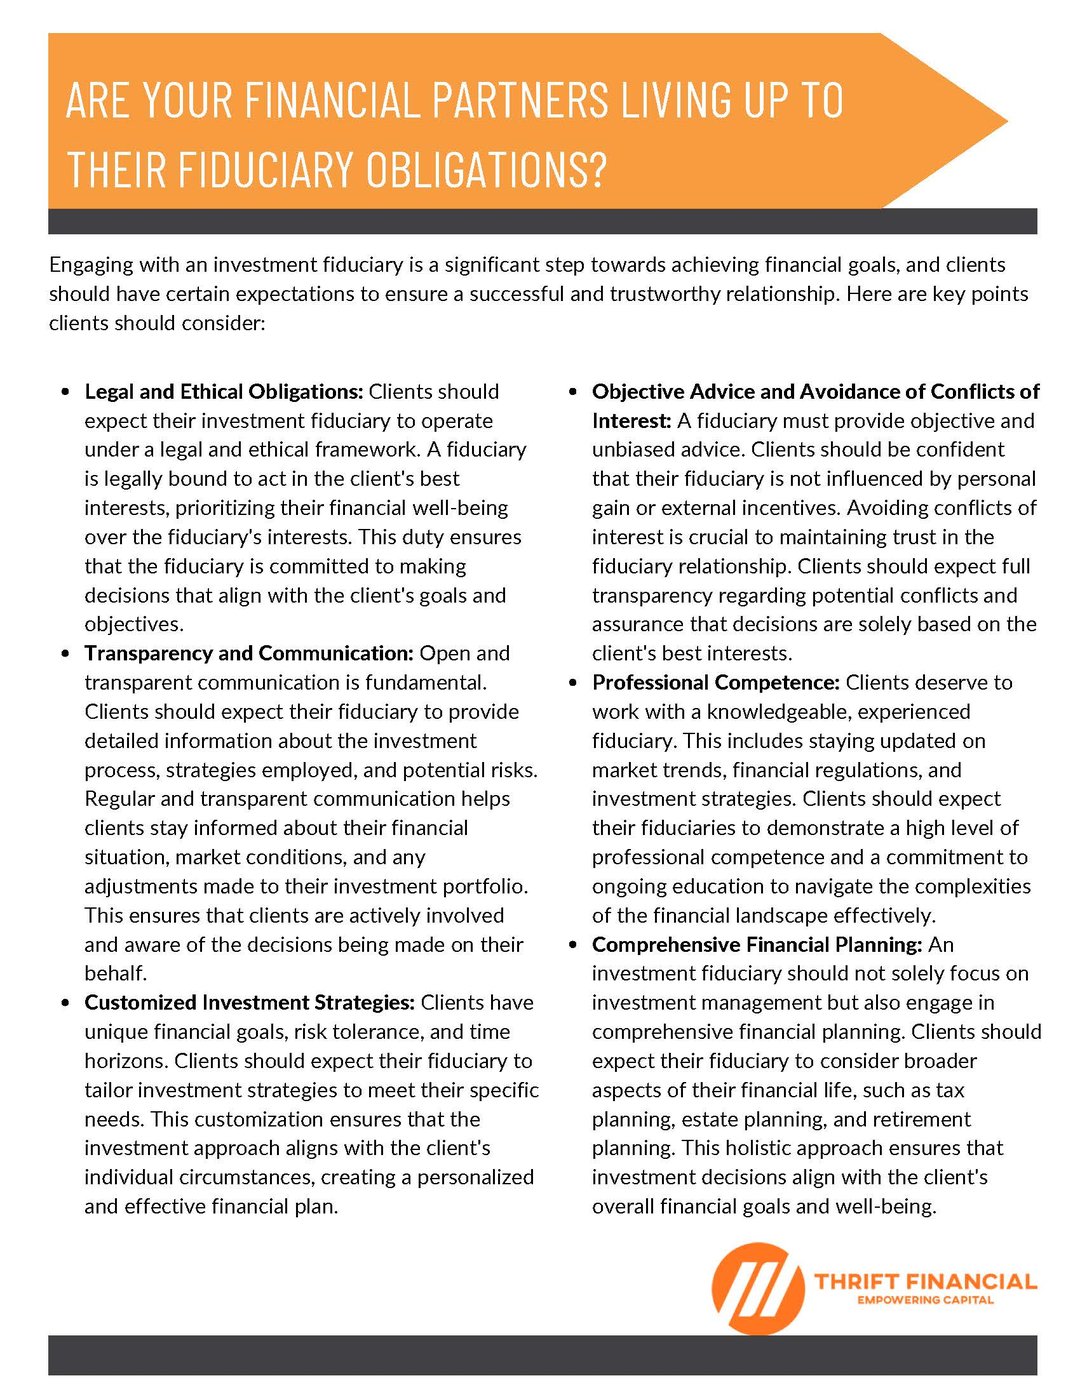 Fiduciary Article and Thrift Fiduciary Standards_Page_1